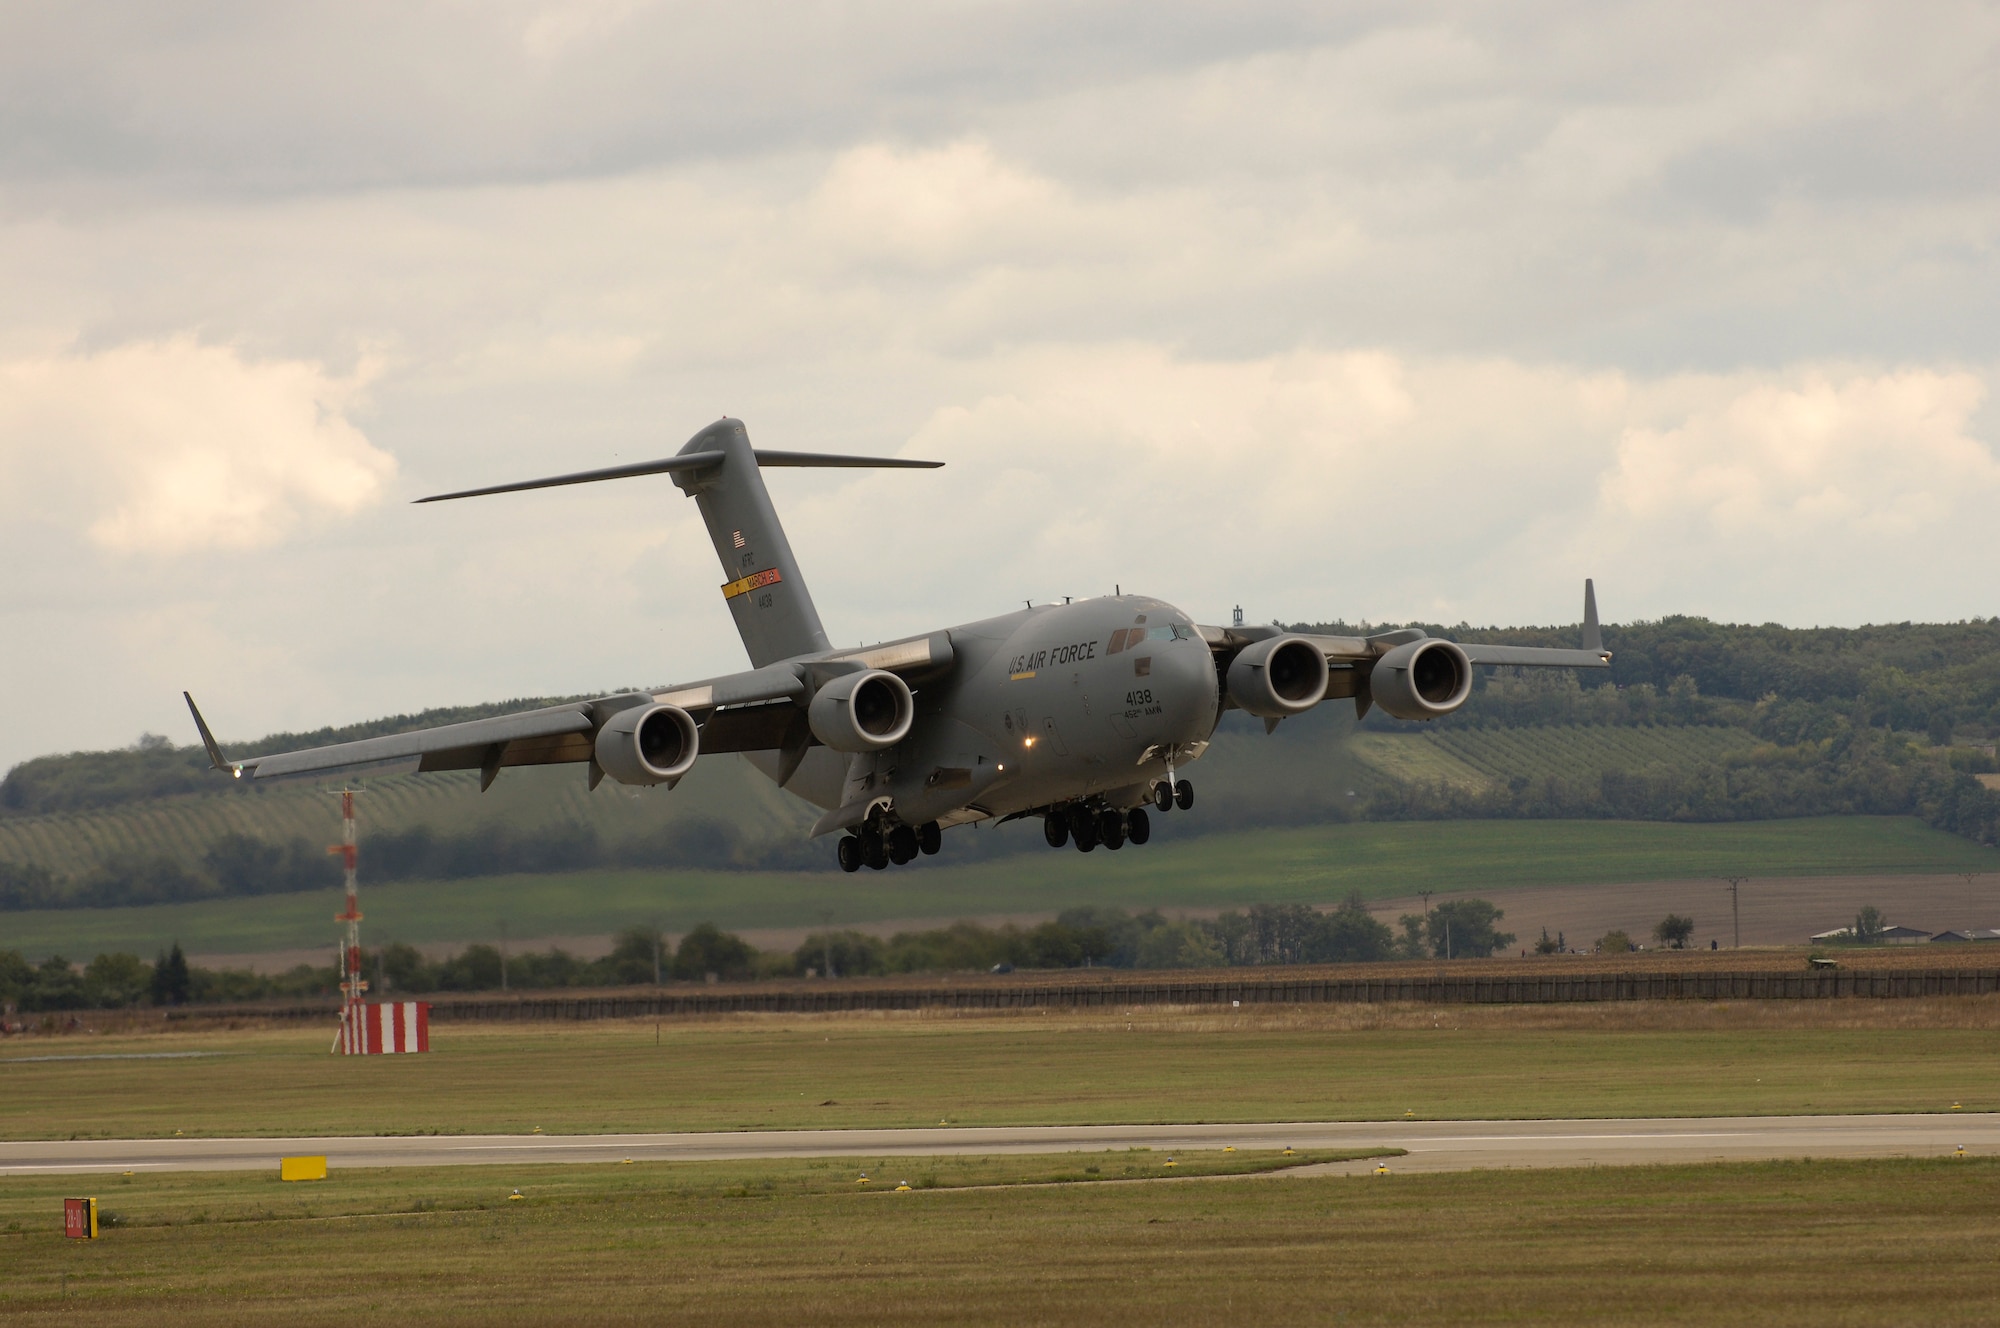 The Spirit of California from March Air Reserve Base, Calif., lands at the Brno International Air Festival in the Czech Republic. The Spirit of California was the first C-17 received by the 729th Airlift Squadron at March. (U.S. Air Force photo by Senior Airman David Flaherty)